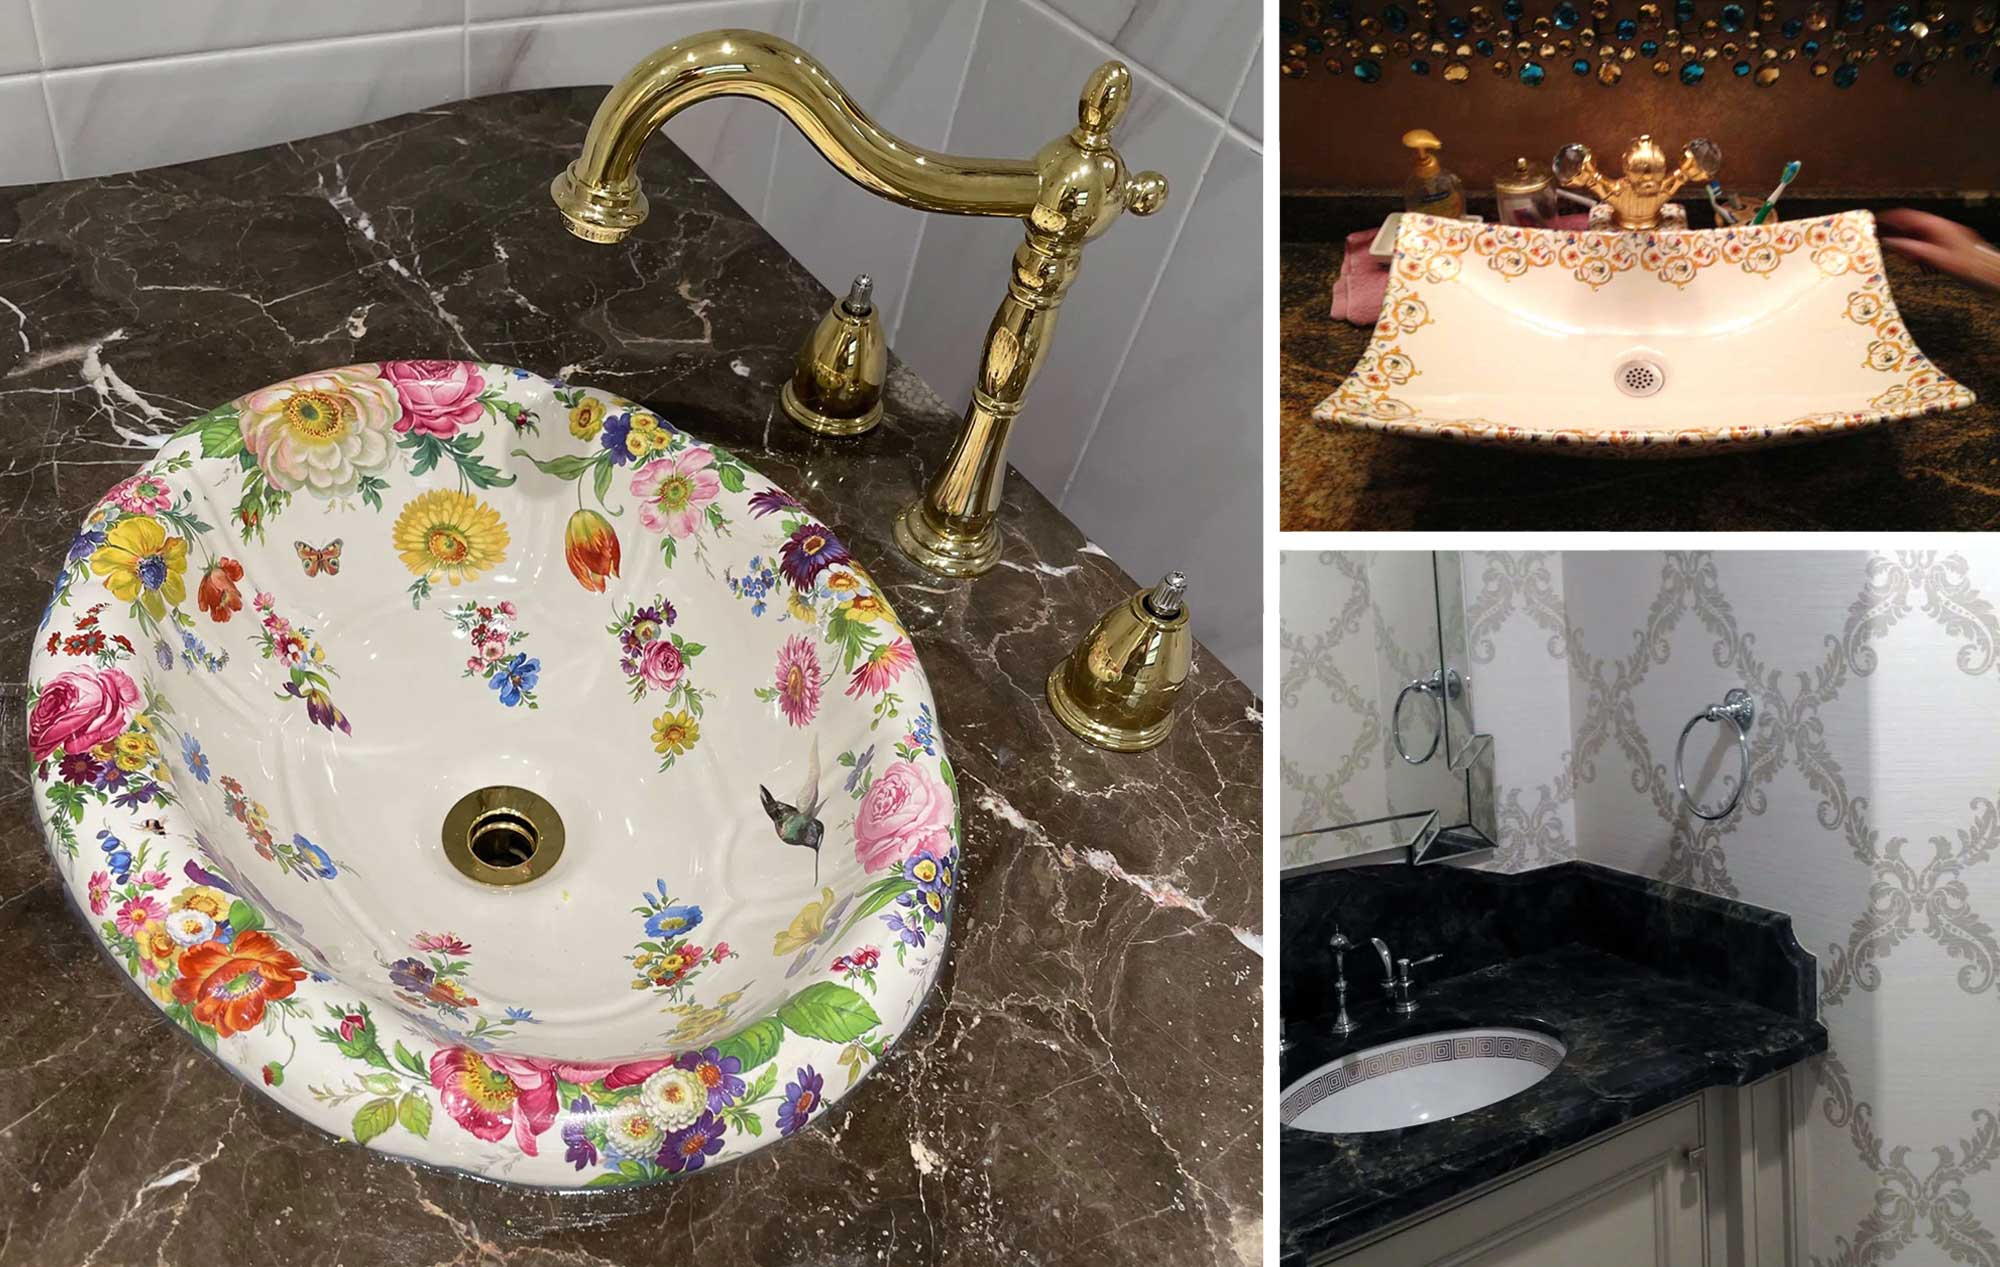 Unique bathroom decoration ideas with hand painted sinks and basins.